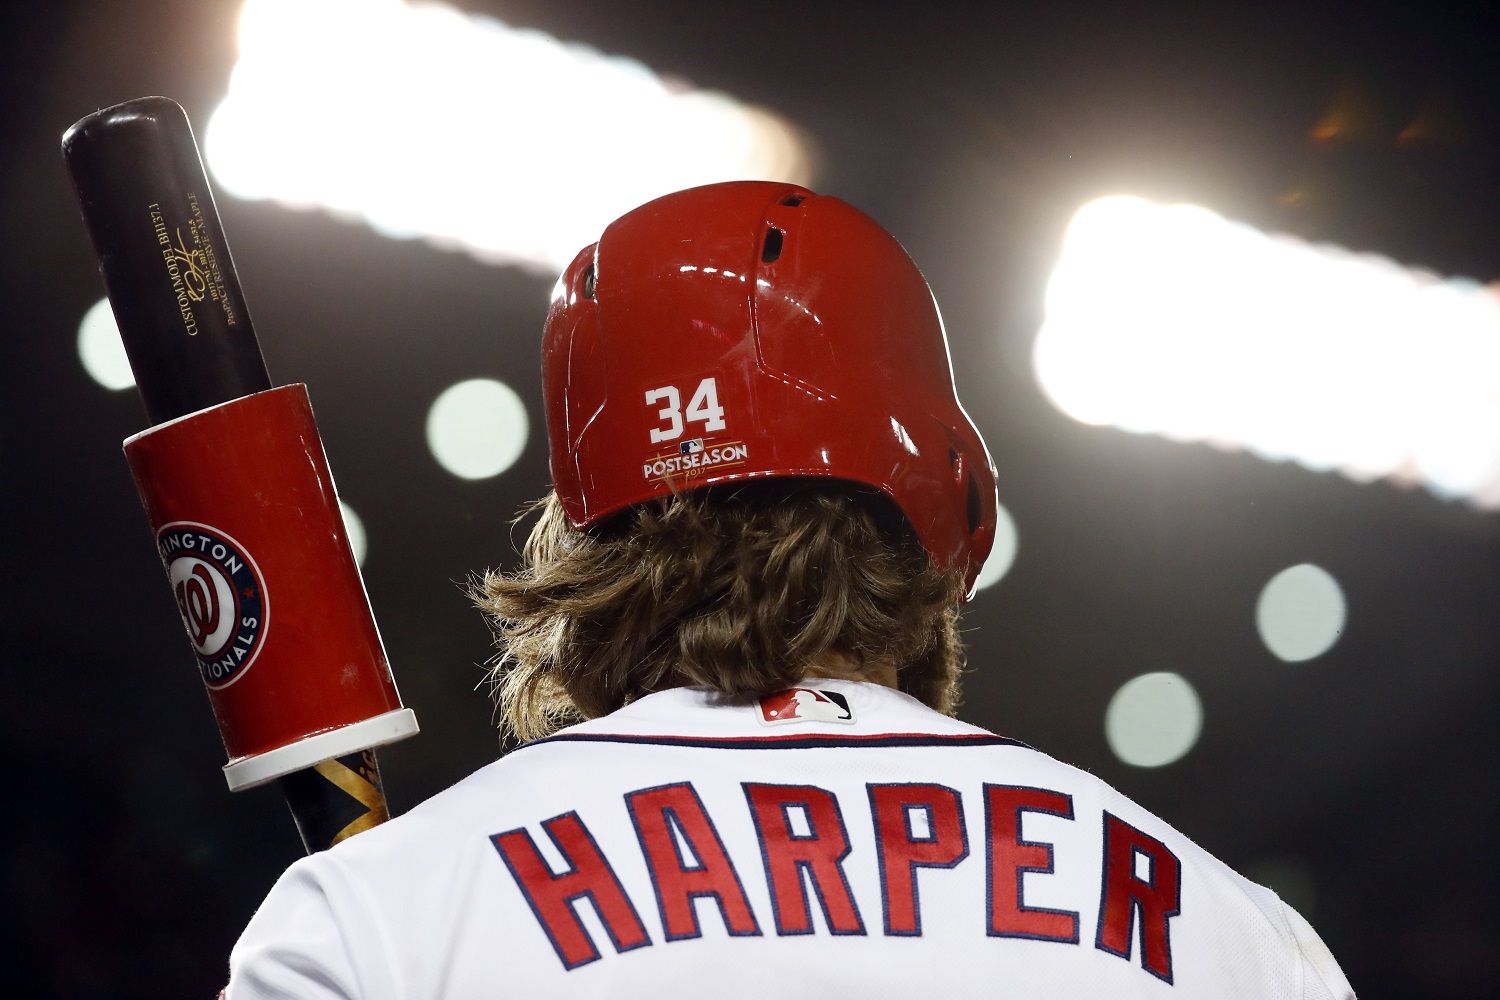 Washington Nationals Bryce Harper (34) stands in the on-deck circle before his at-bat in the fourthinning of Game 5 of baseball's National League Division Series, at Nationals Park, Thursday, Oct. 12, 2017, in Washington. (AP Photo/Alex Brandon)